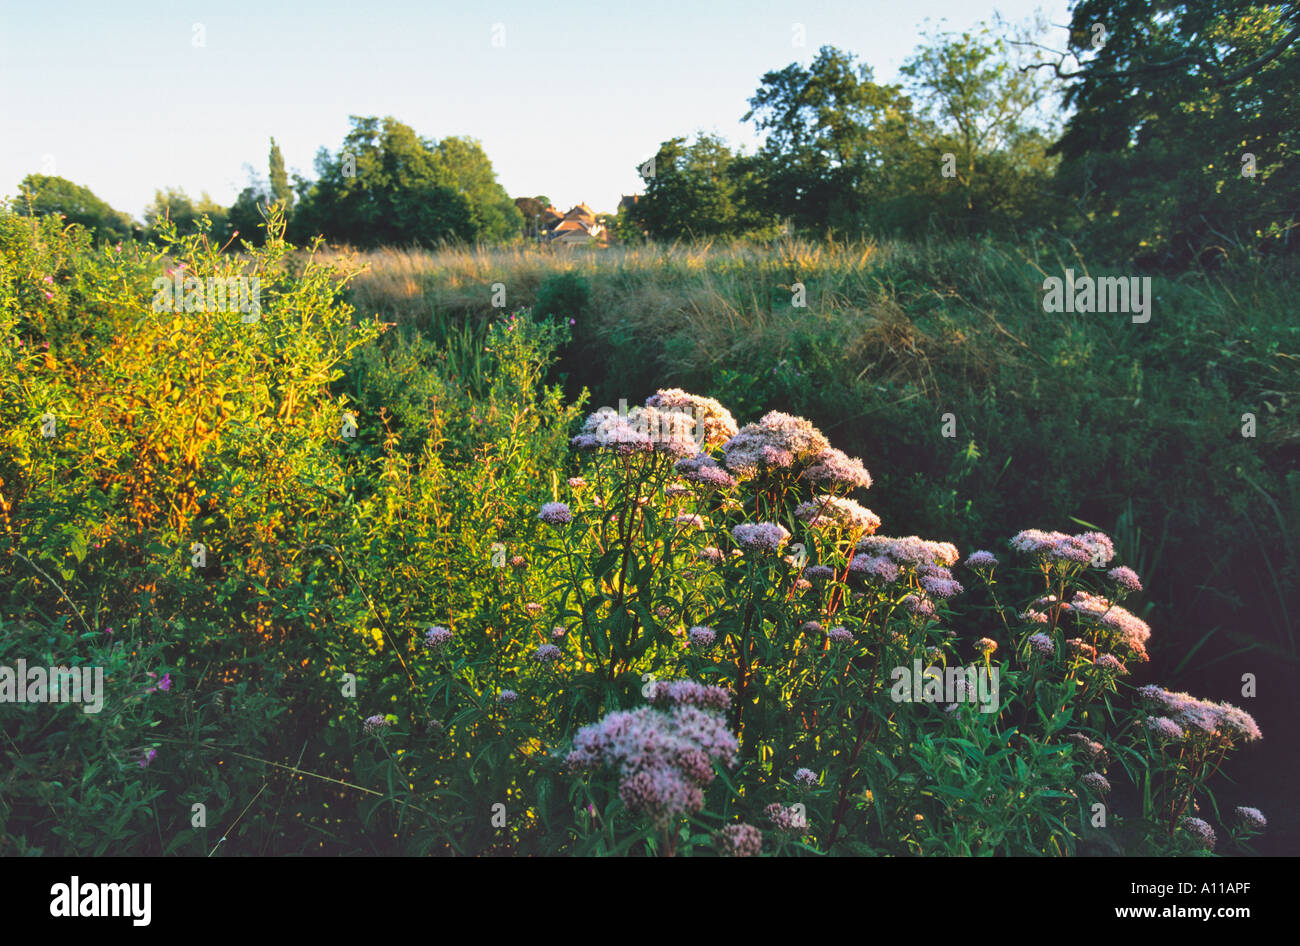 Watermeadow along the banks of the River Stour, Gillingham, Dorset Stock Photo